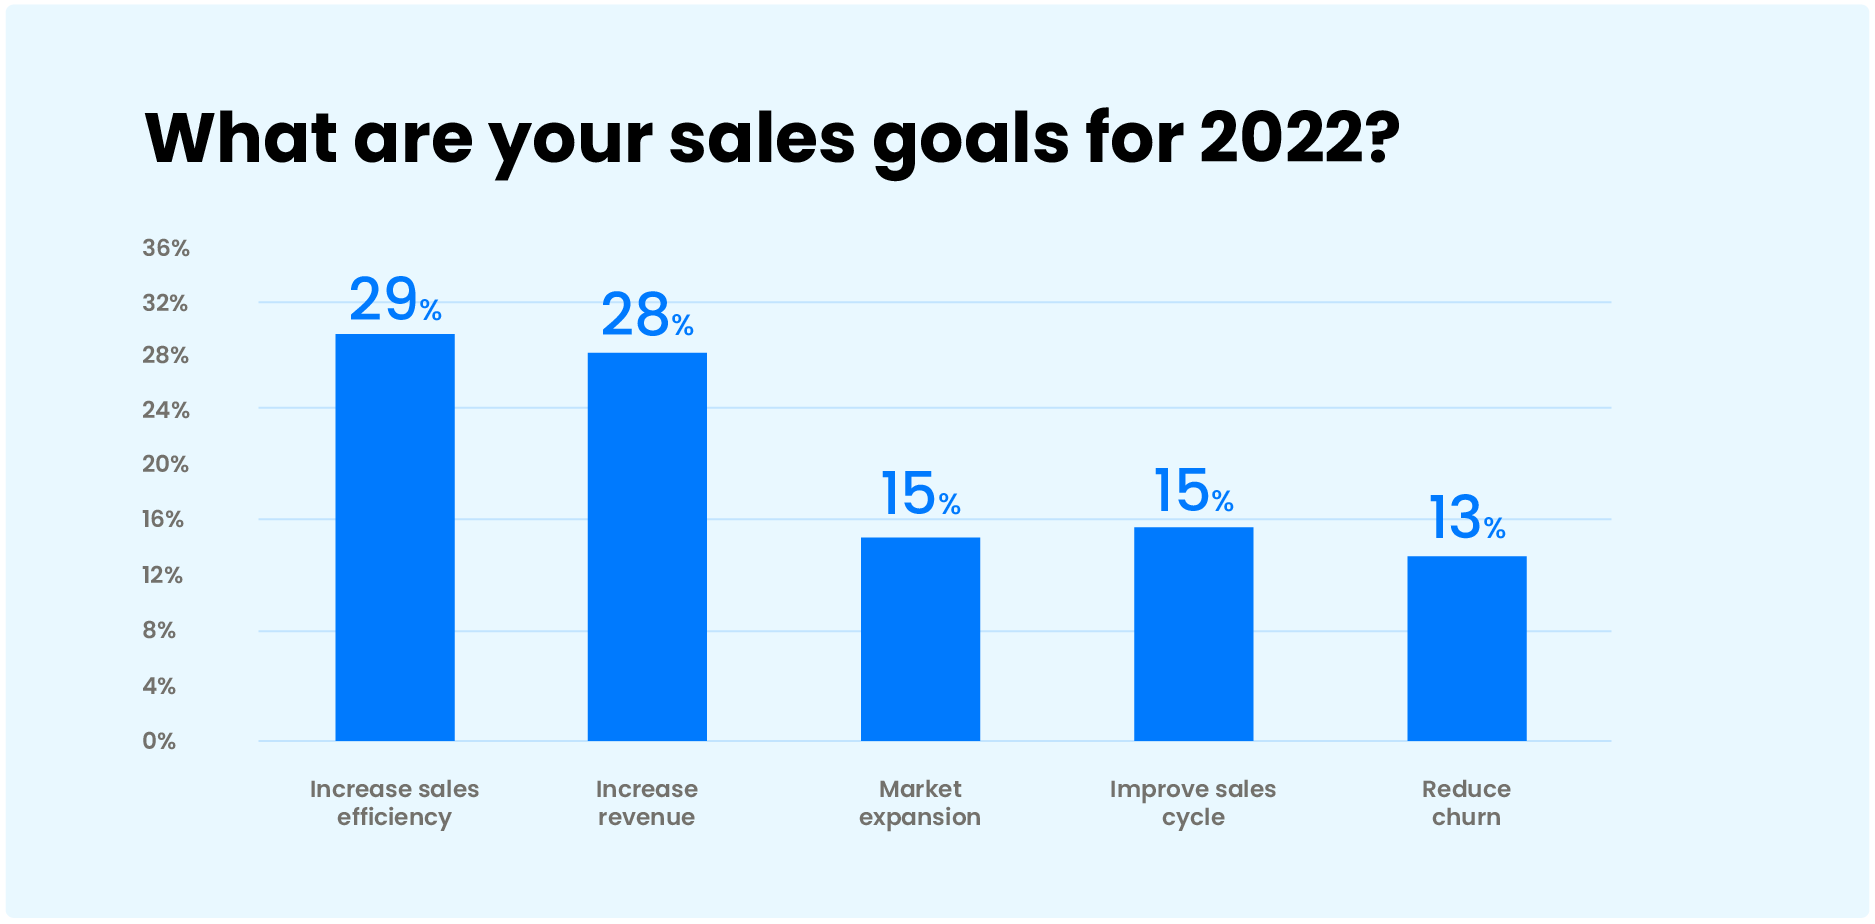 What are your sales goals for 2022